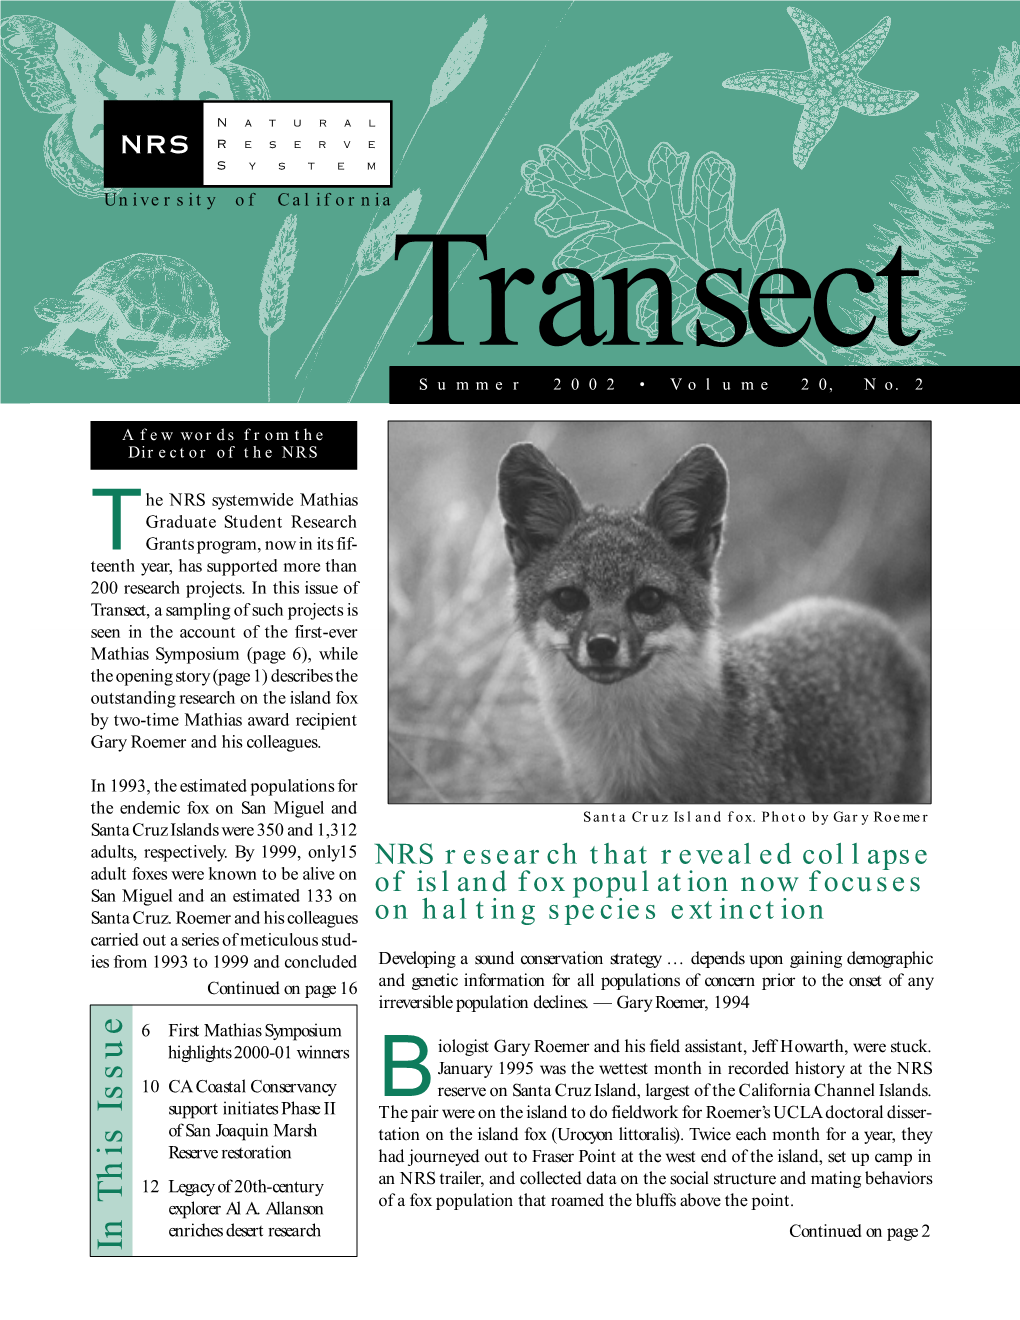 UC Natural Reserve System Transect Publication 20:2